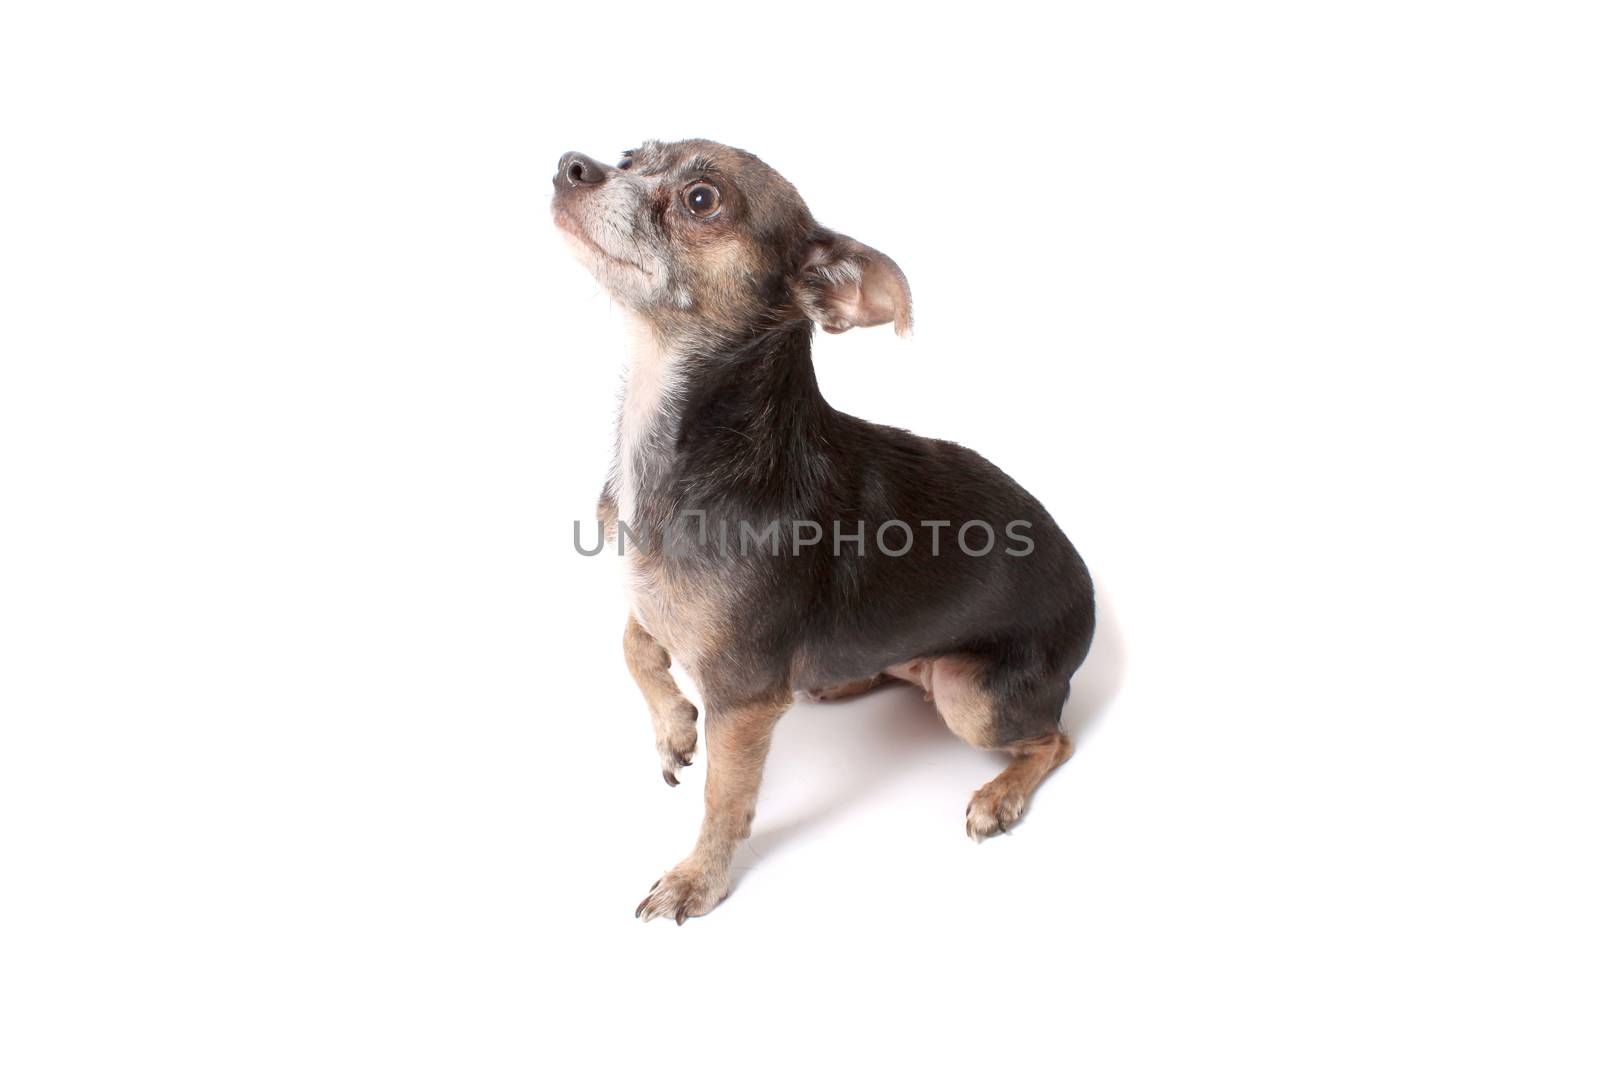 Cute little chihuahua dog looking frightened while begging with his paw up in the air on a white background